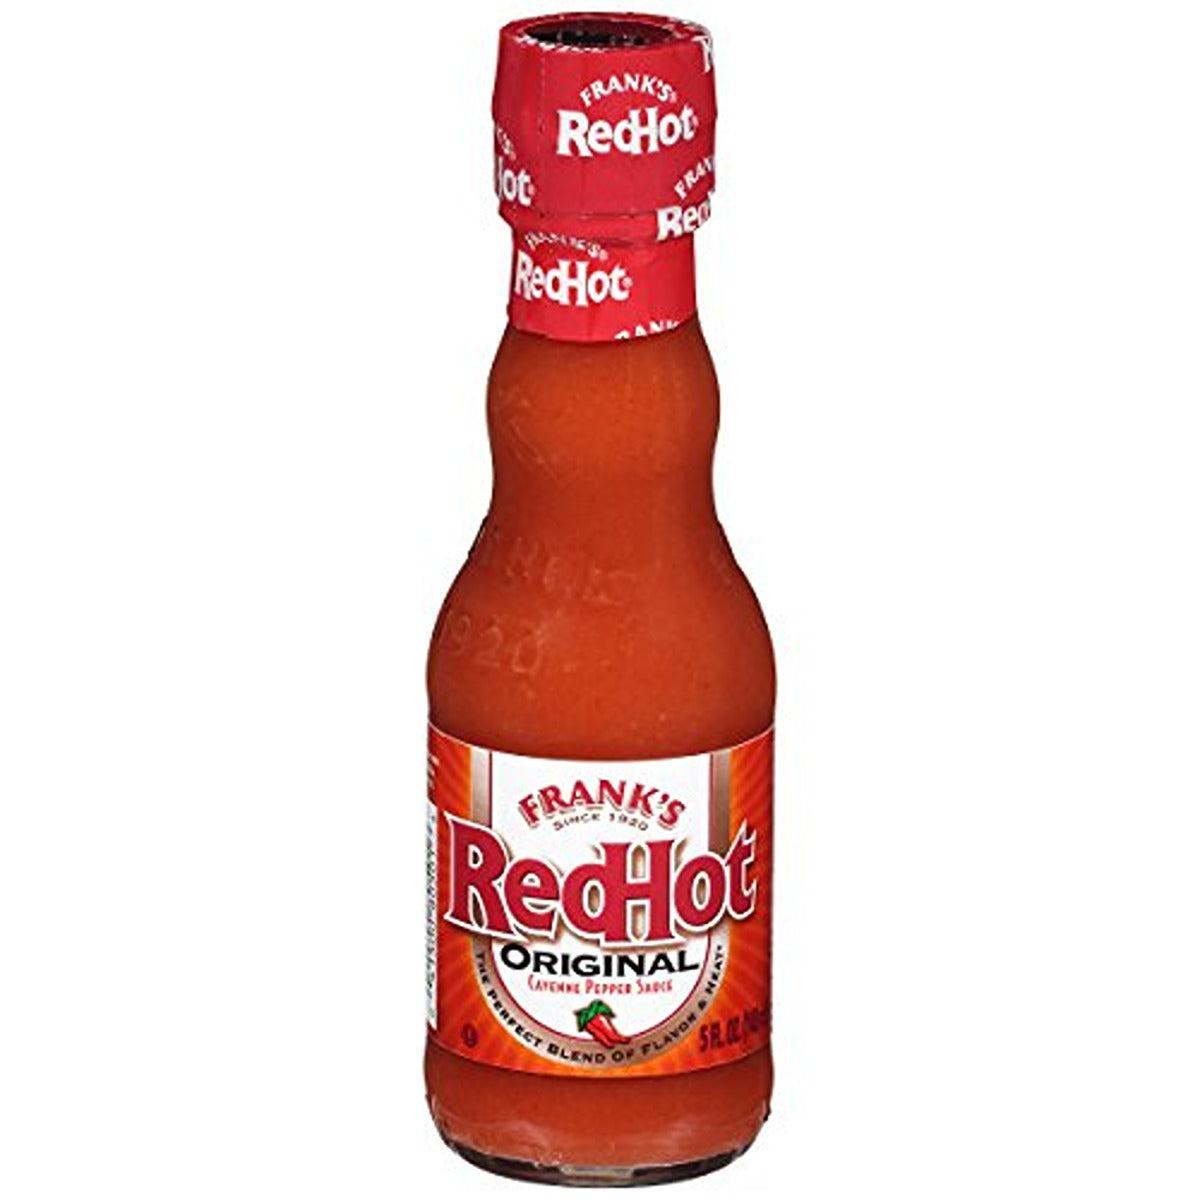 A bottle of Frank's - Red Hot Cayenne Pepper Sauce Original - 148ml on a white background.